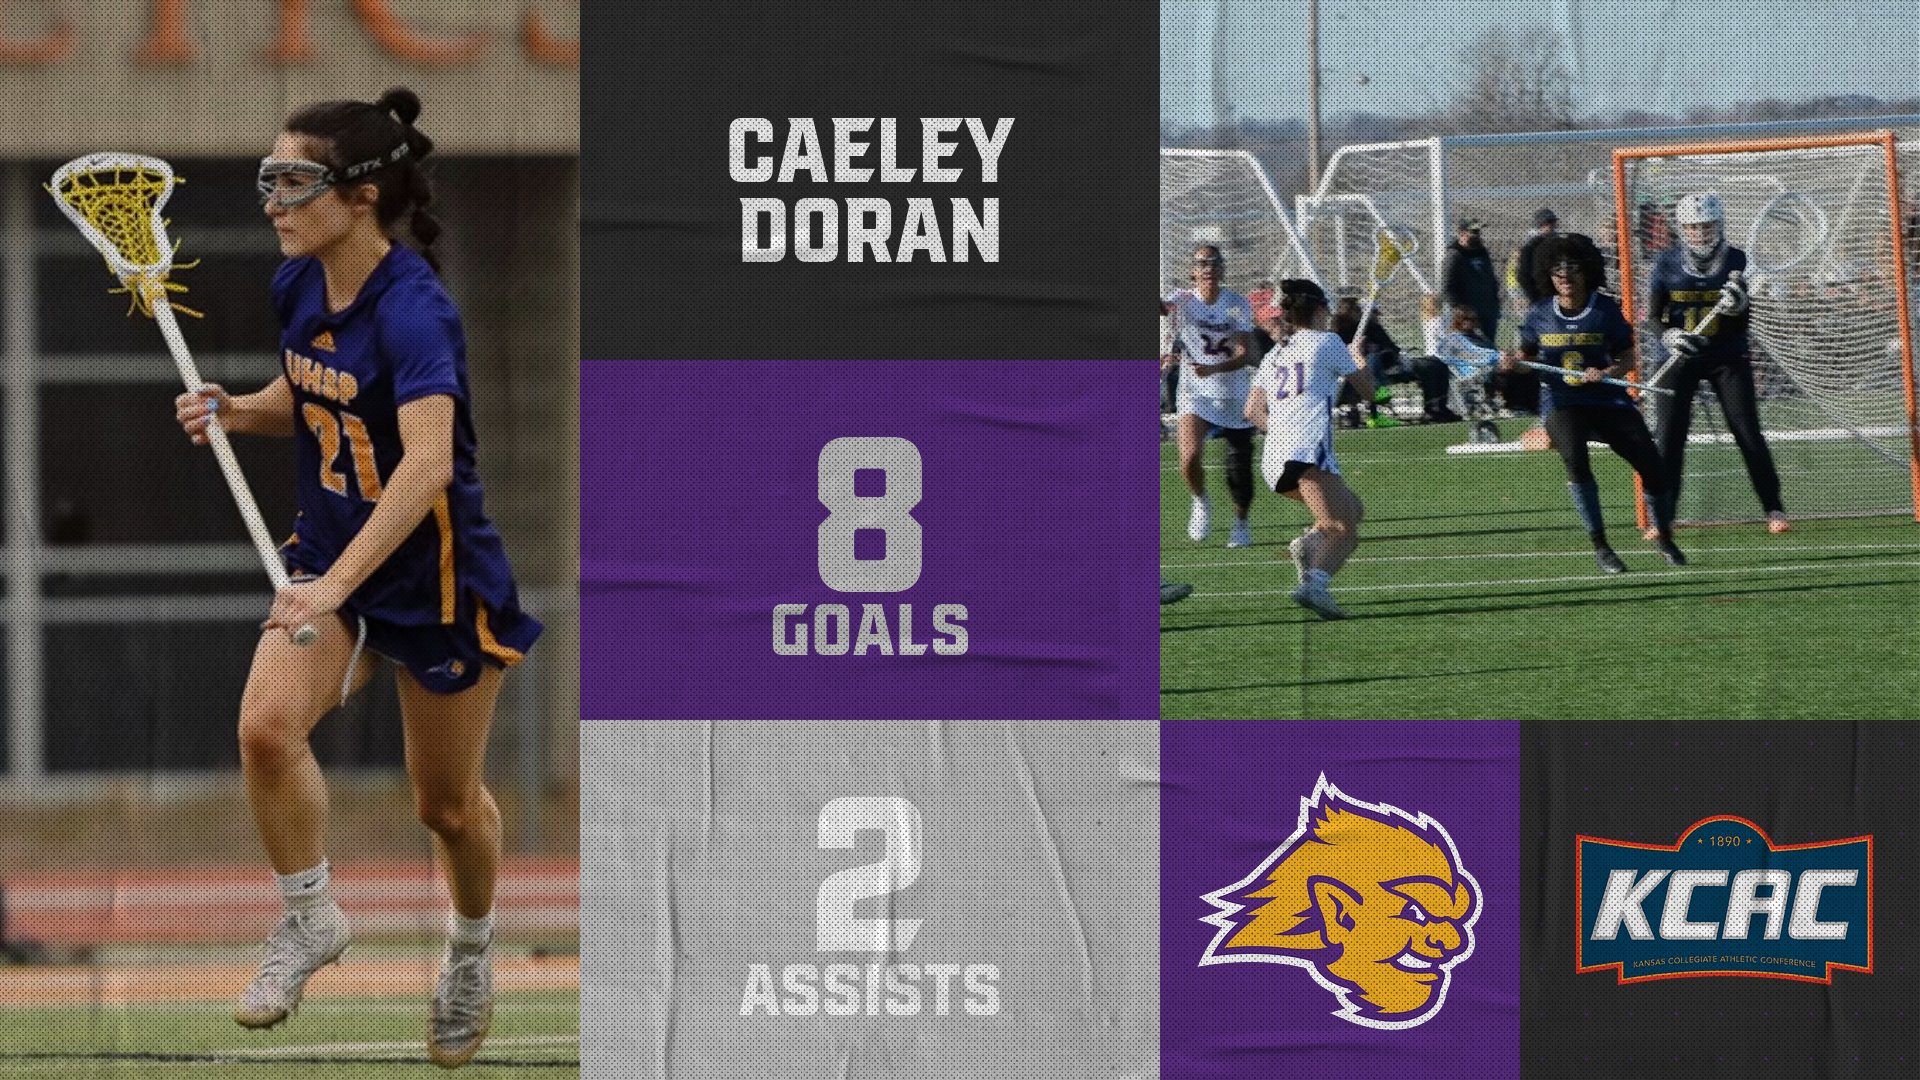 Caeley Doran first Eutectic to be named WLAX POW